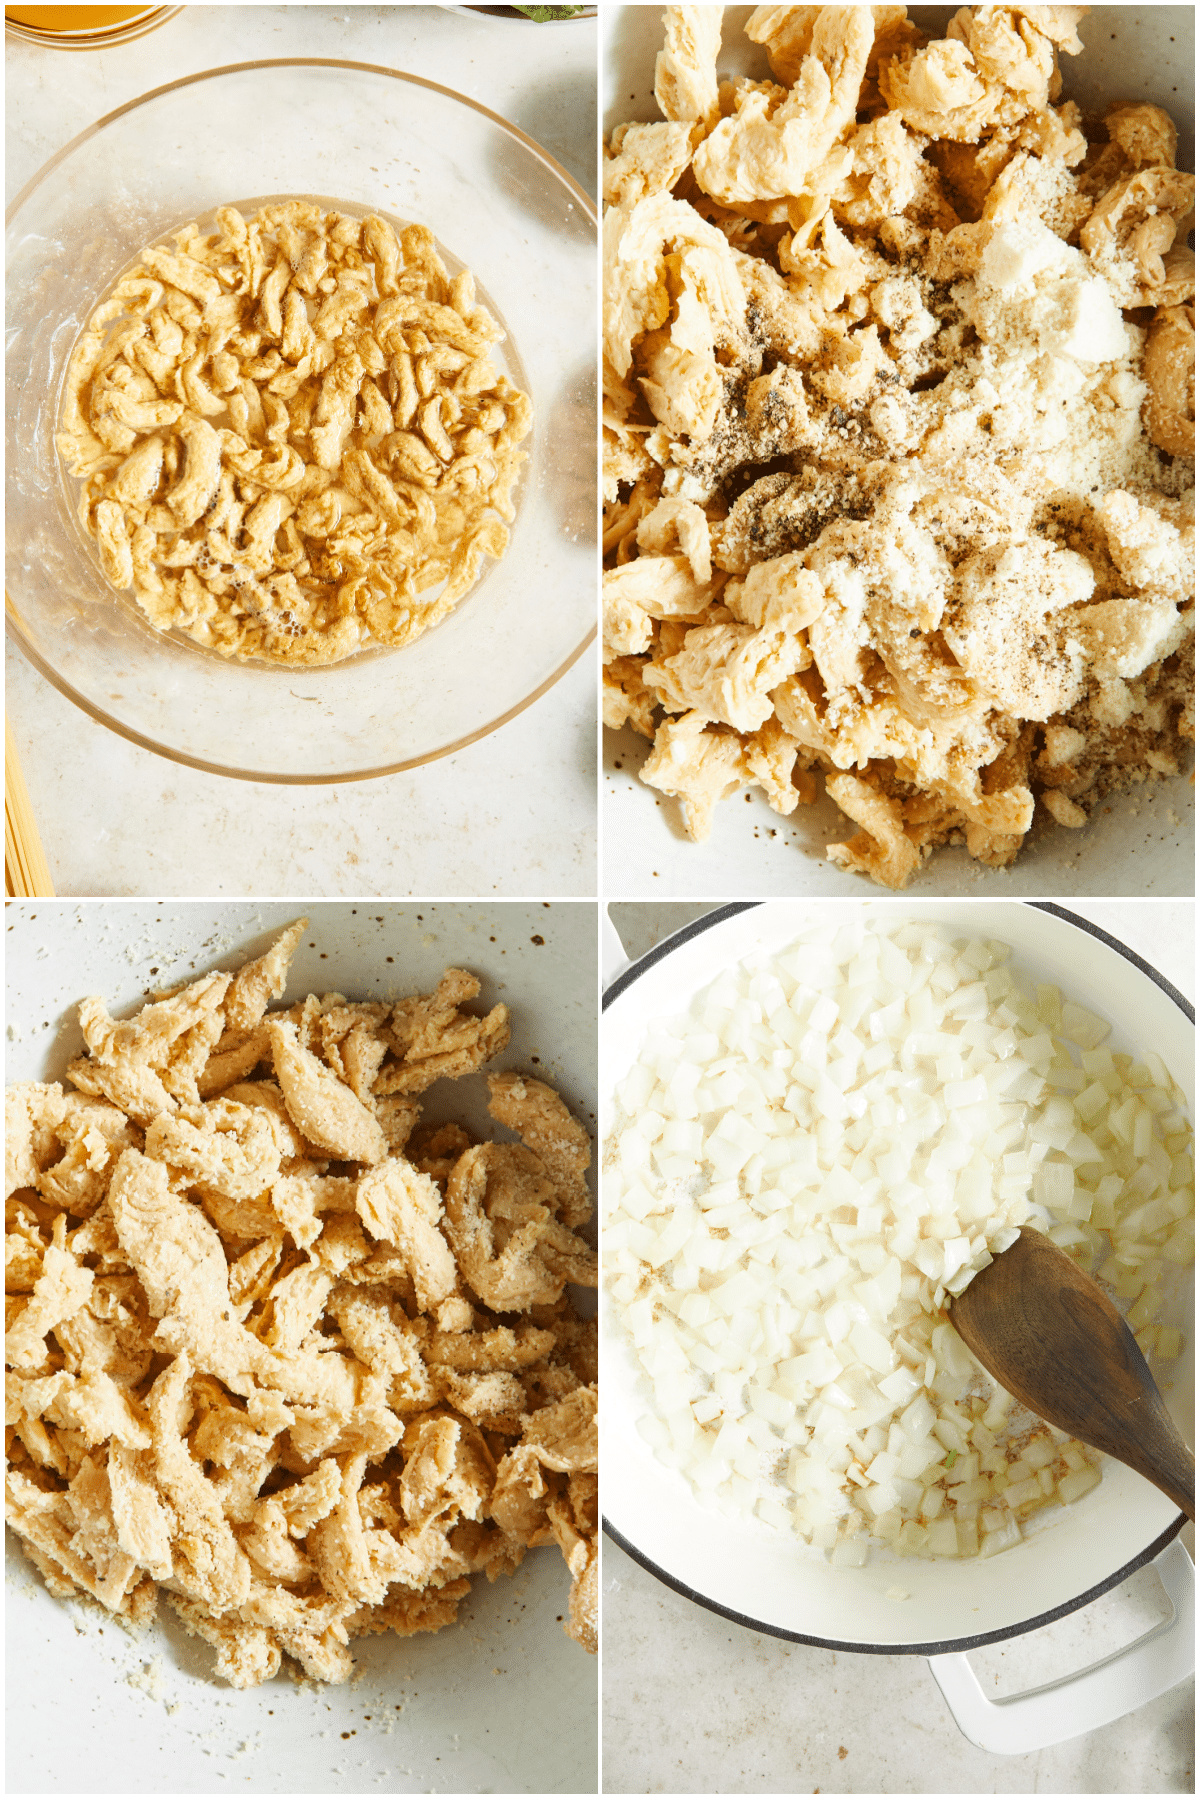 A four image collage showing how to make vegan chicken piccata, part 1: rehydrate soy curls by soaking them in hot water, drain soy curls and coat in almond flour, sauté onion and garlic.